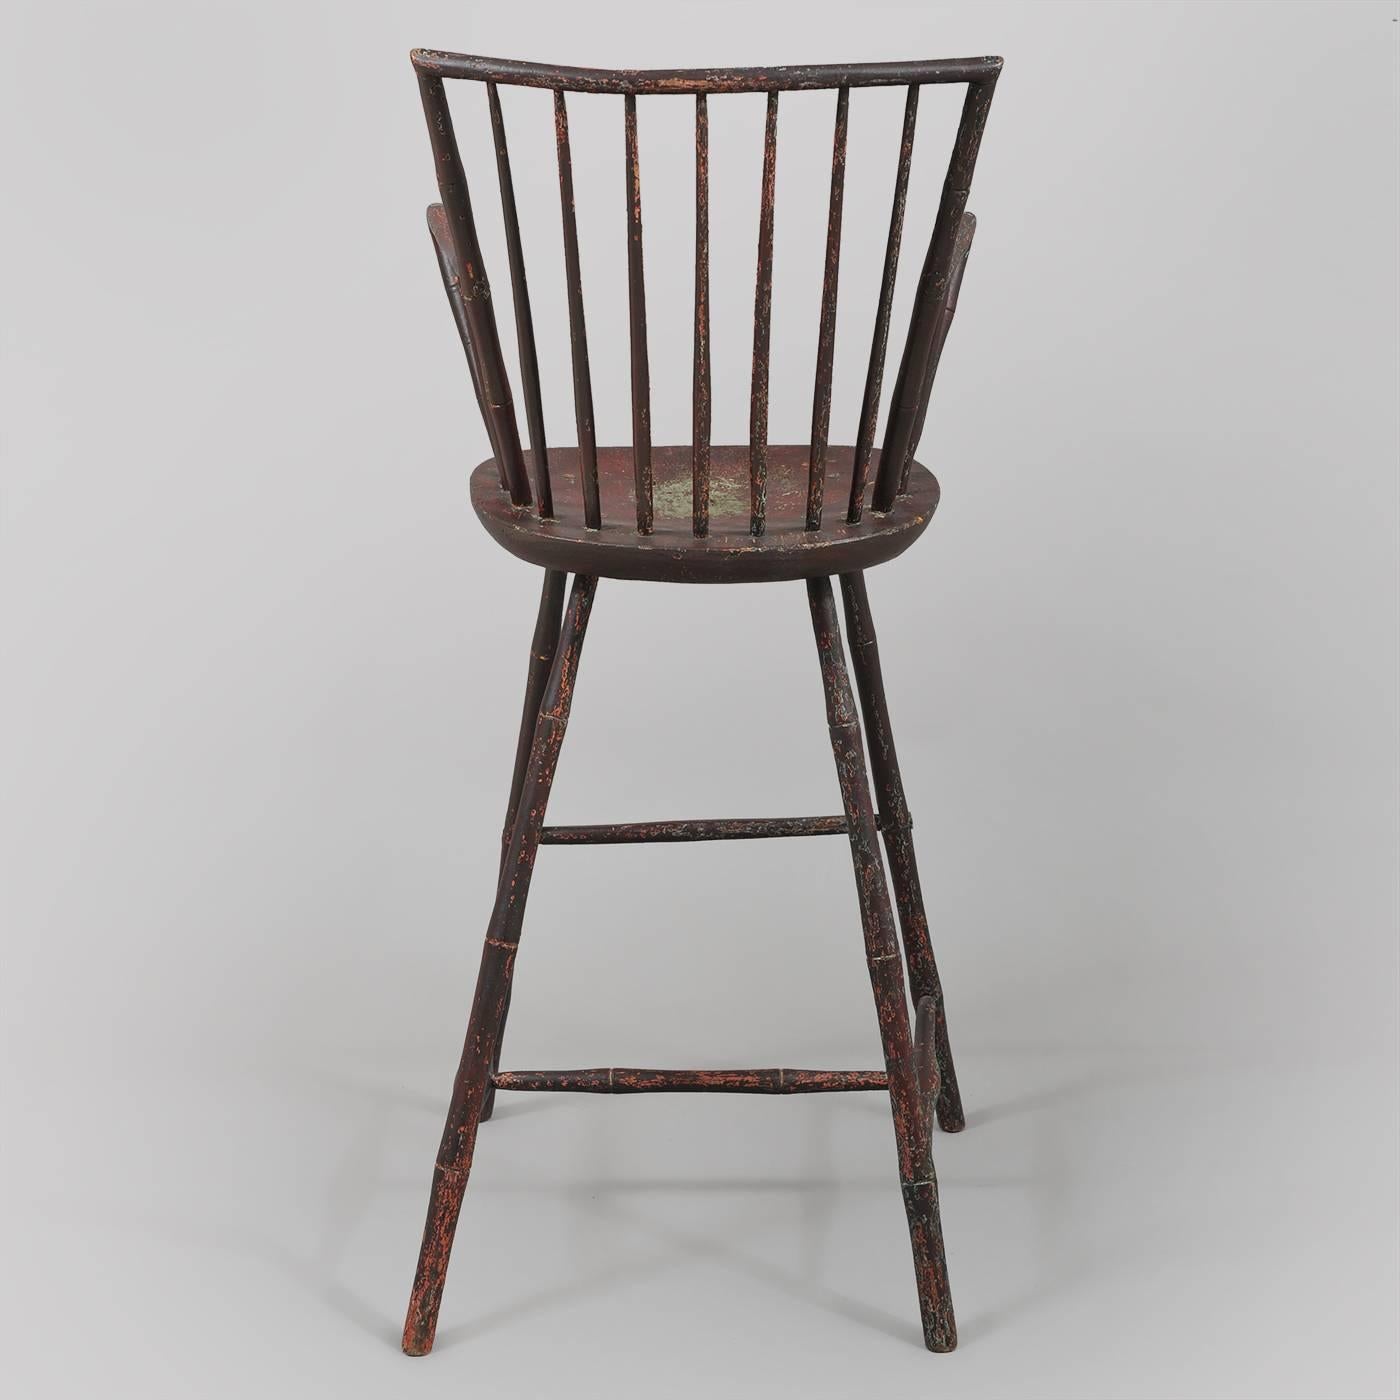 Tall Painted Windsor Armchair In Excellent Condition For Sale In Litchfield, CT